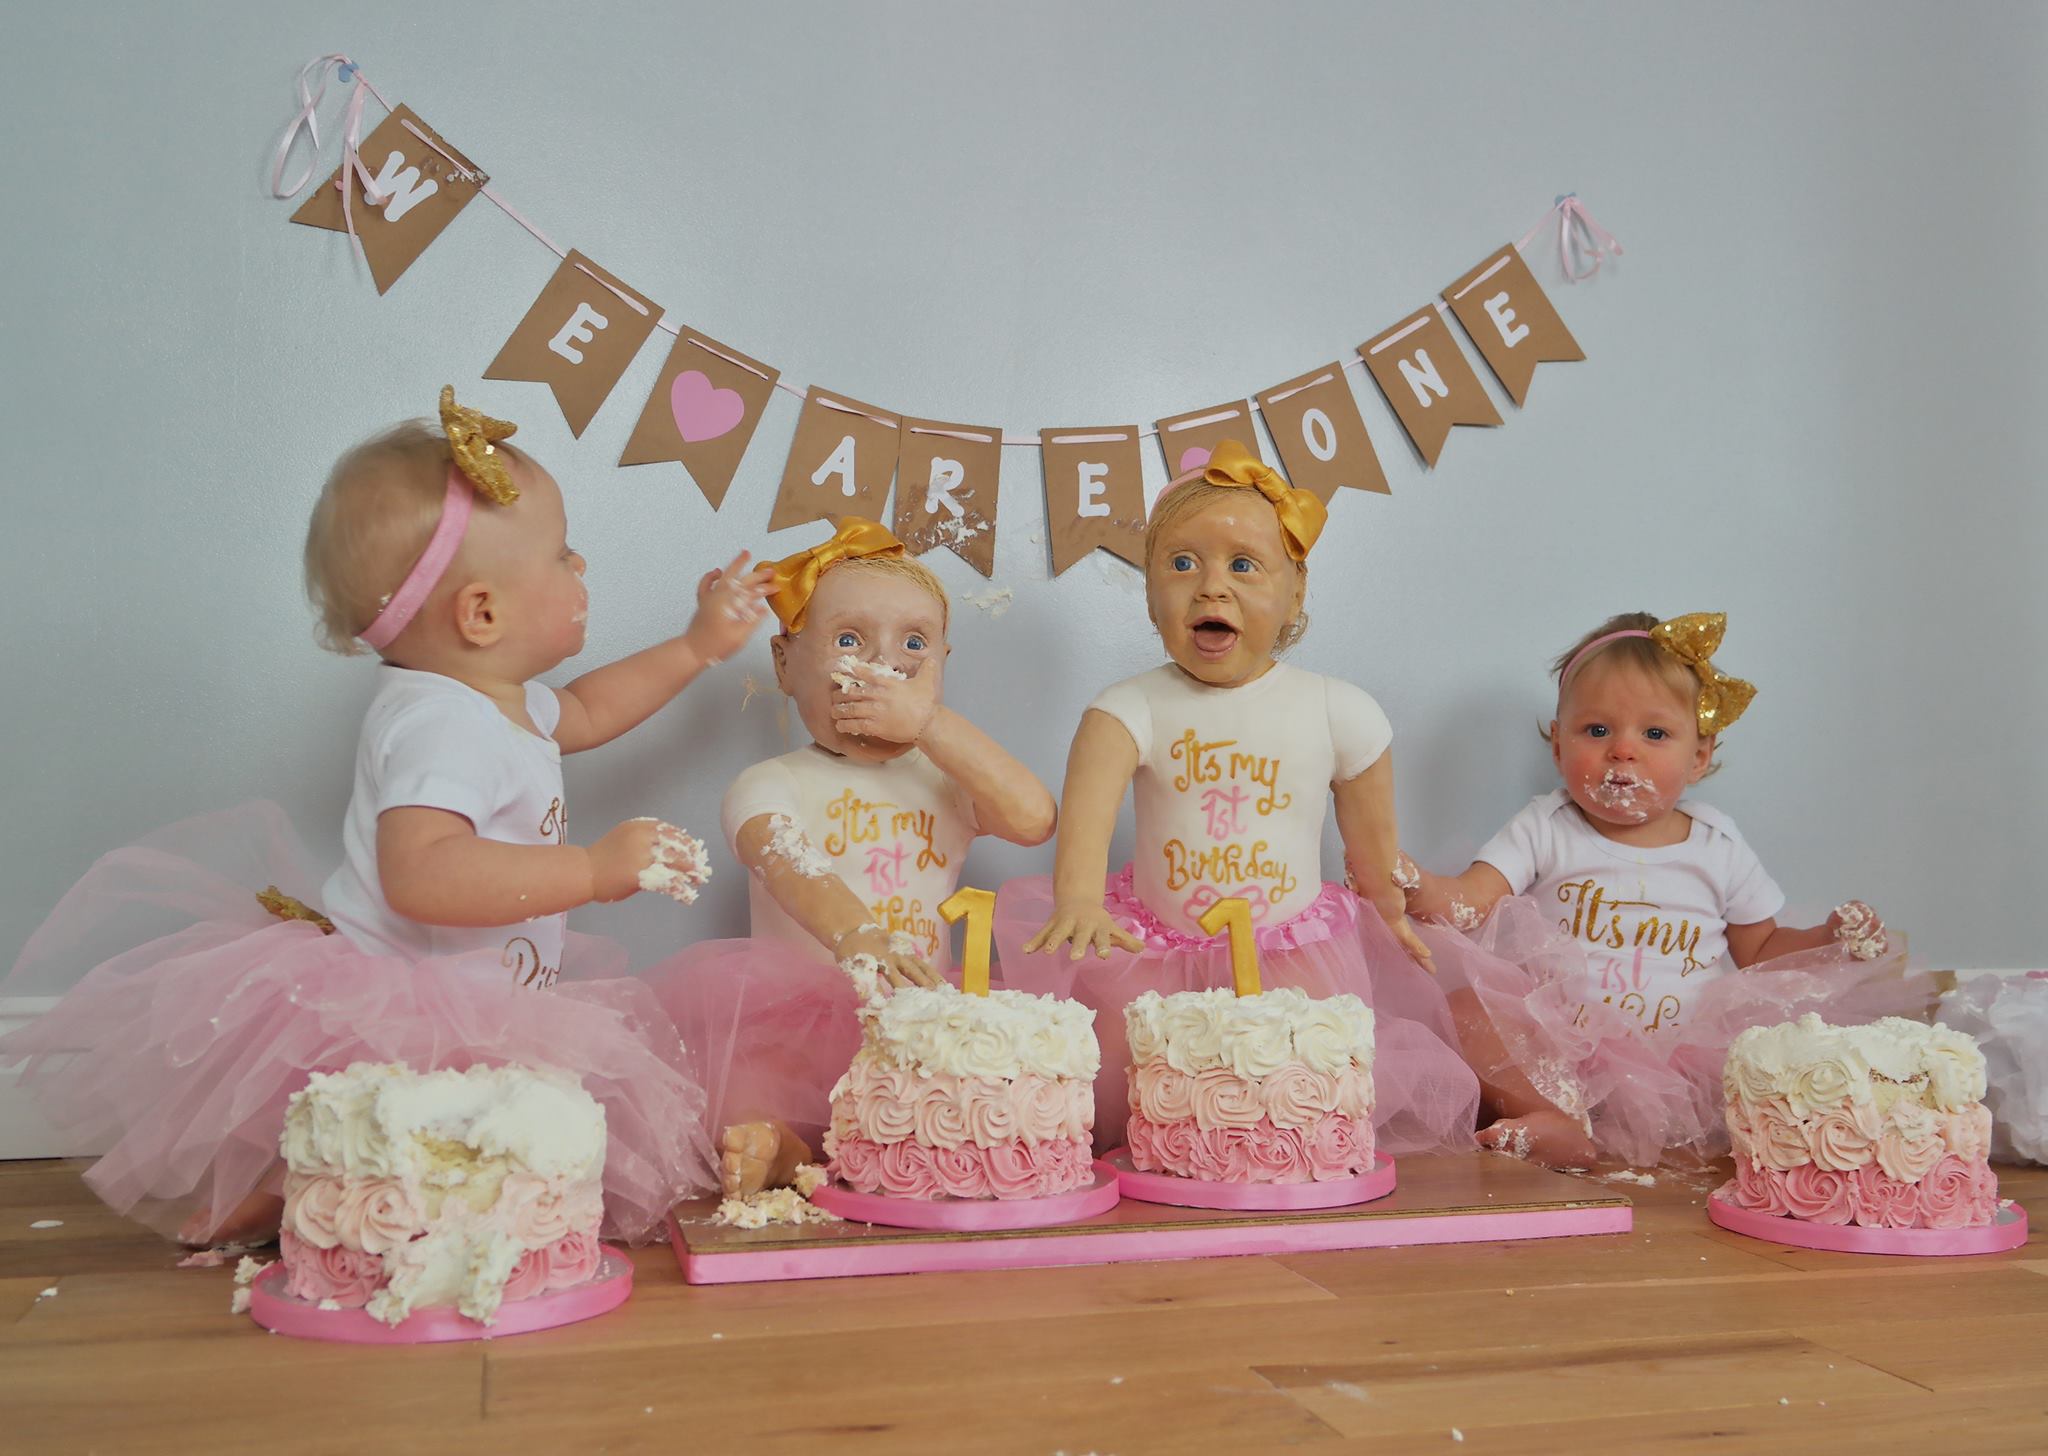 Dolce Vita Cakes - First birthday cake for a set of twins, boy and girl!  Happy birthday, grow up healthy!🎊🎂💞 | Facebook